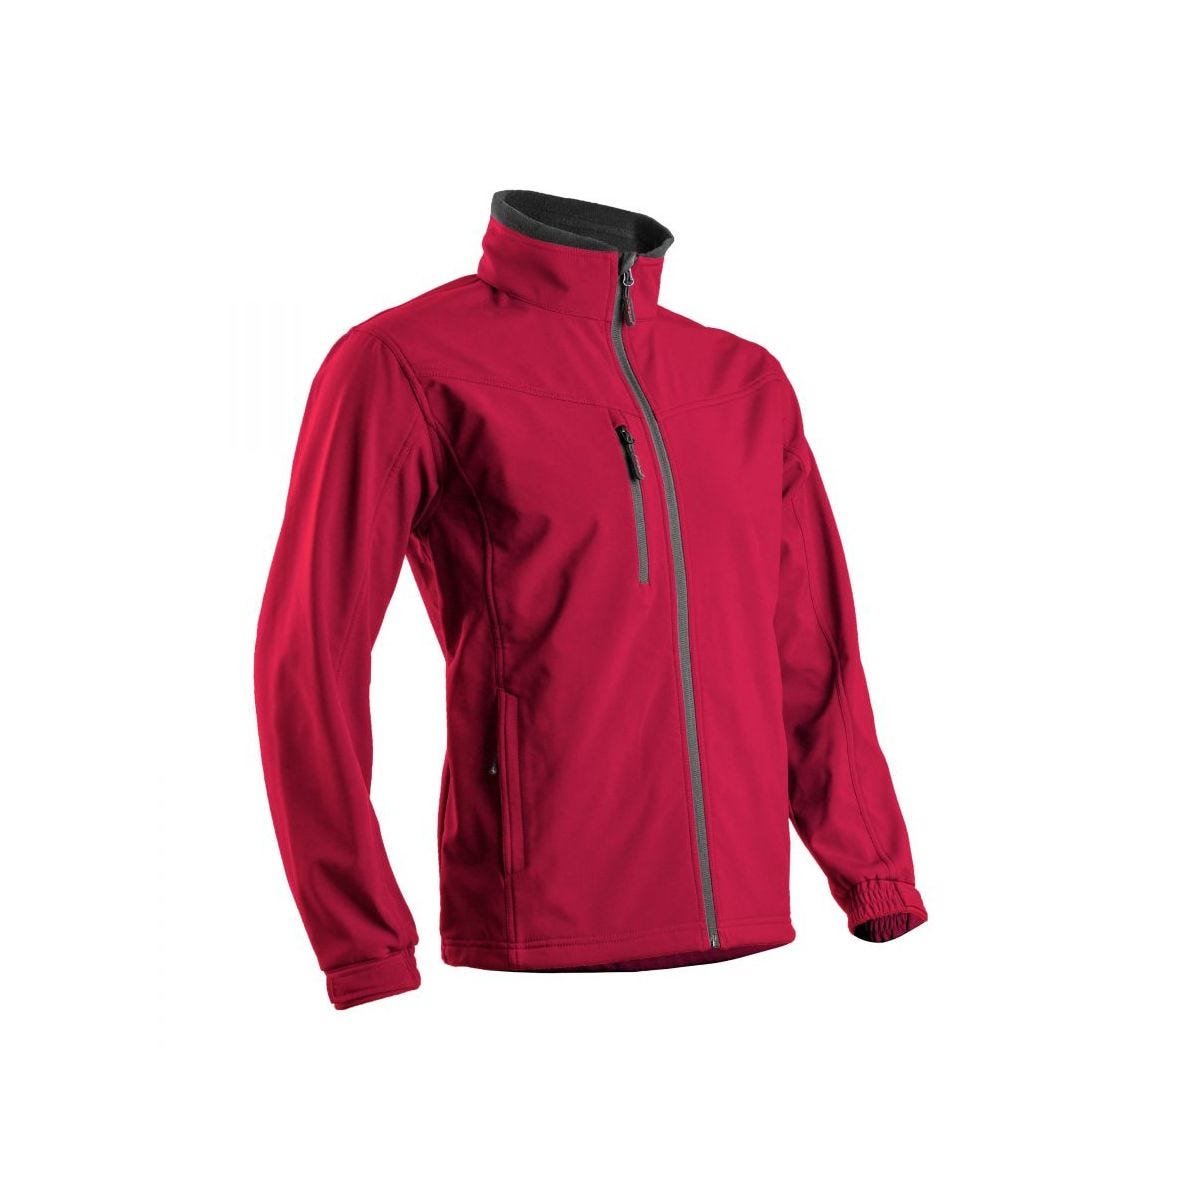 Veste softshell YANG II Rouge - Coverguard - Taille 2XL 0